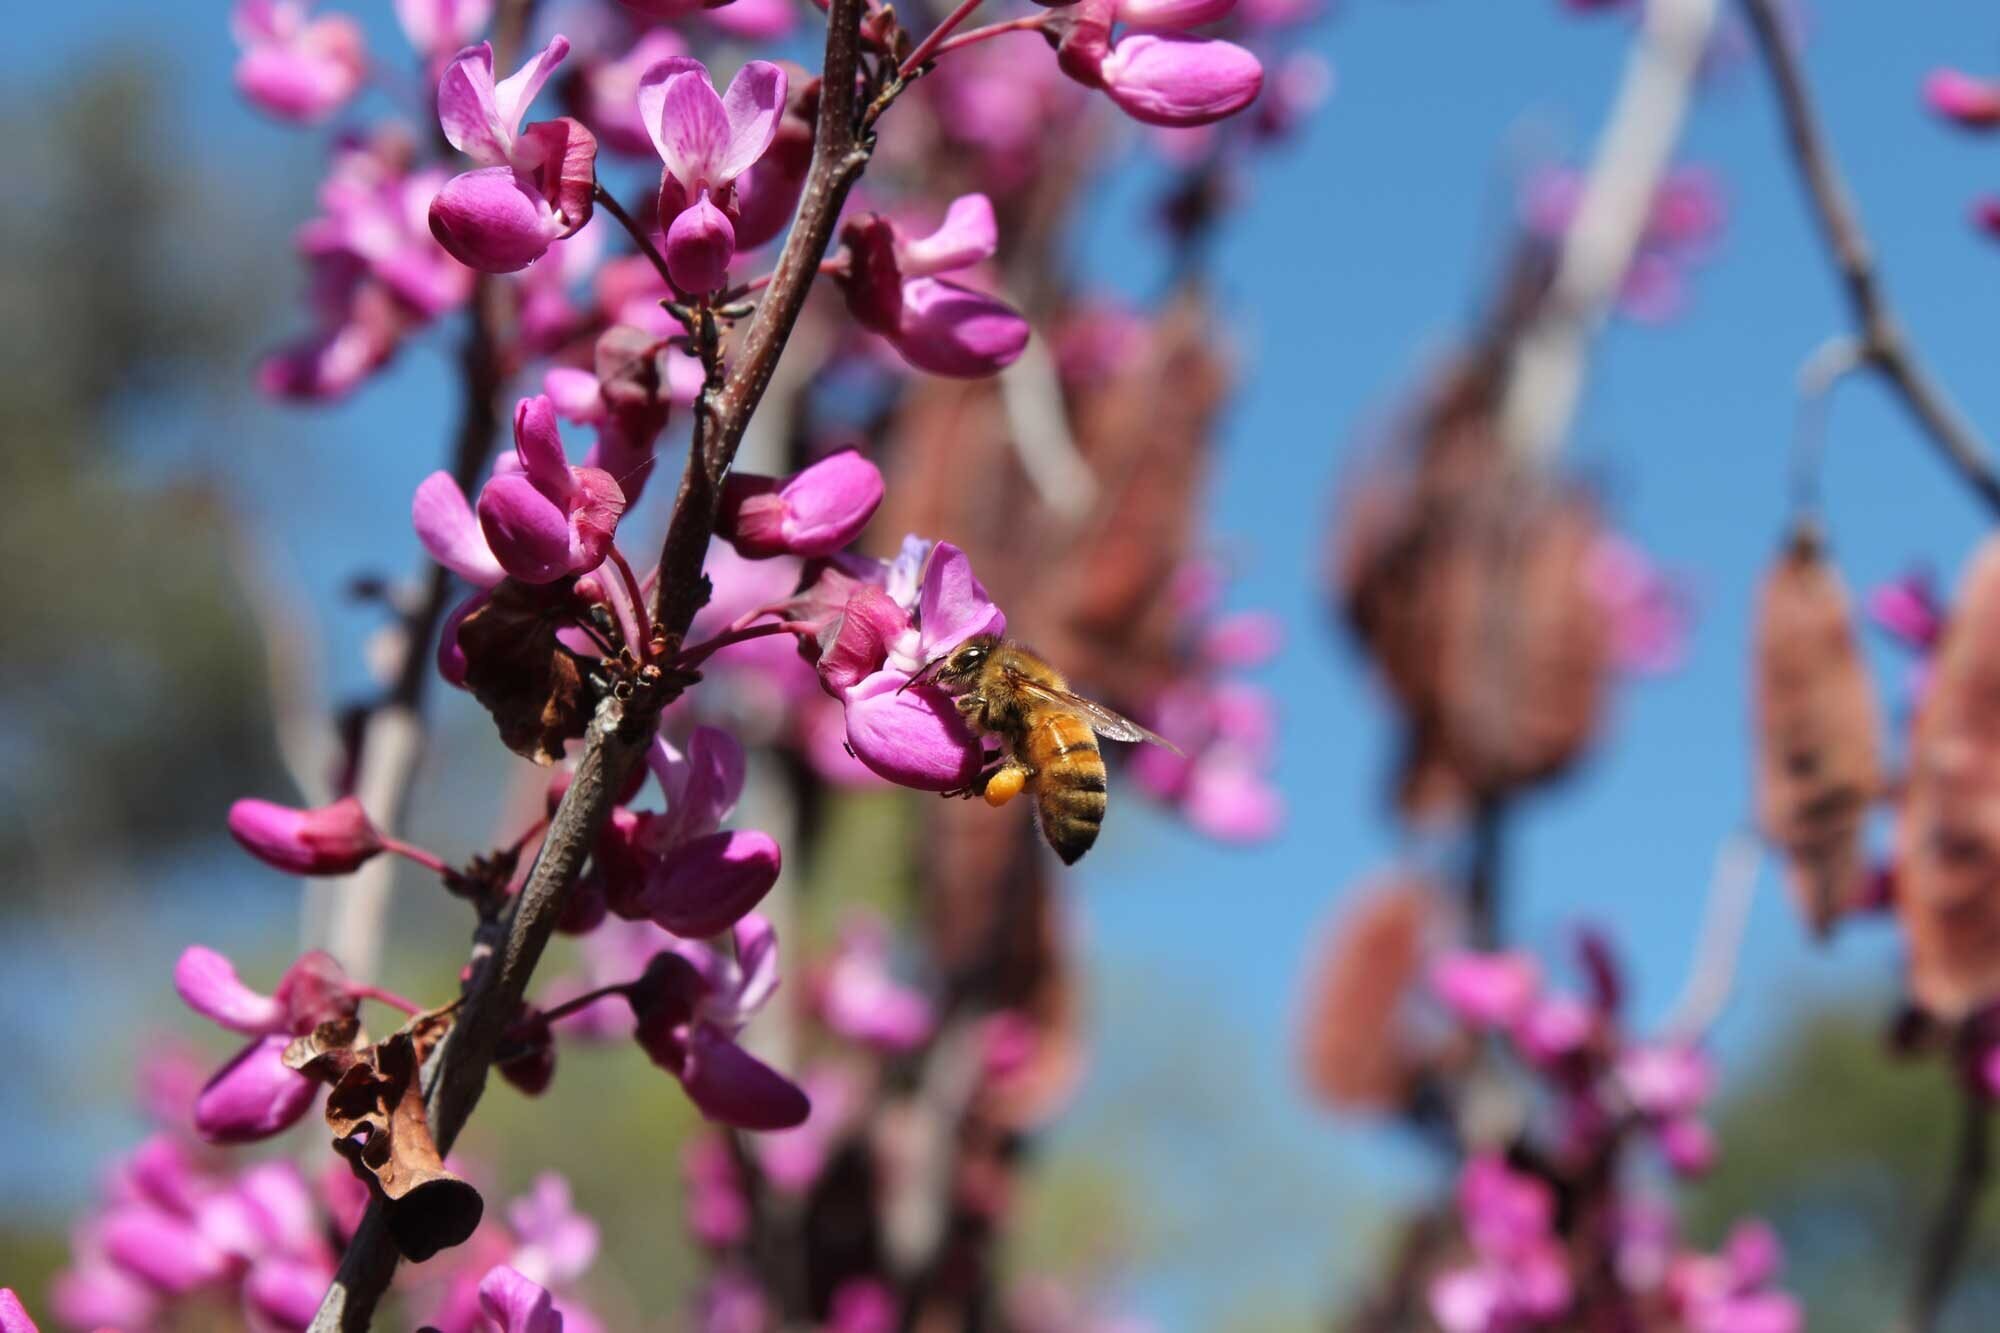 Study finds both habitat quality and biodiversity can impact bee health